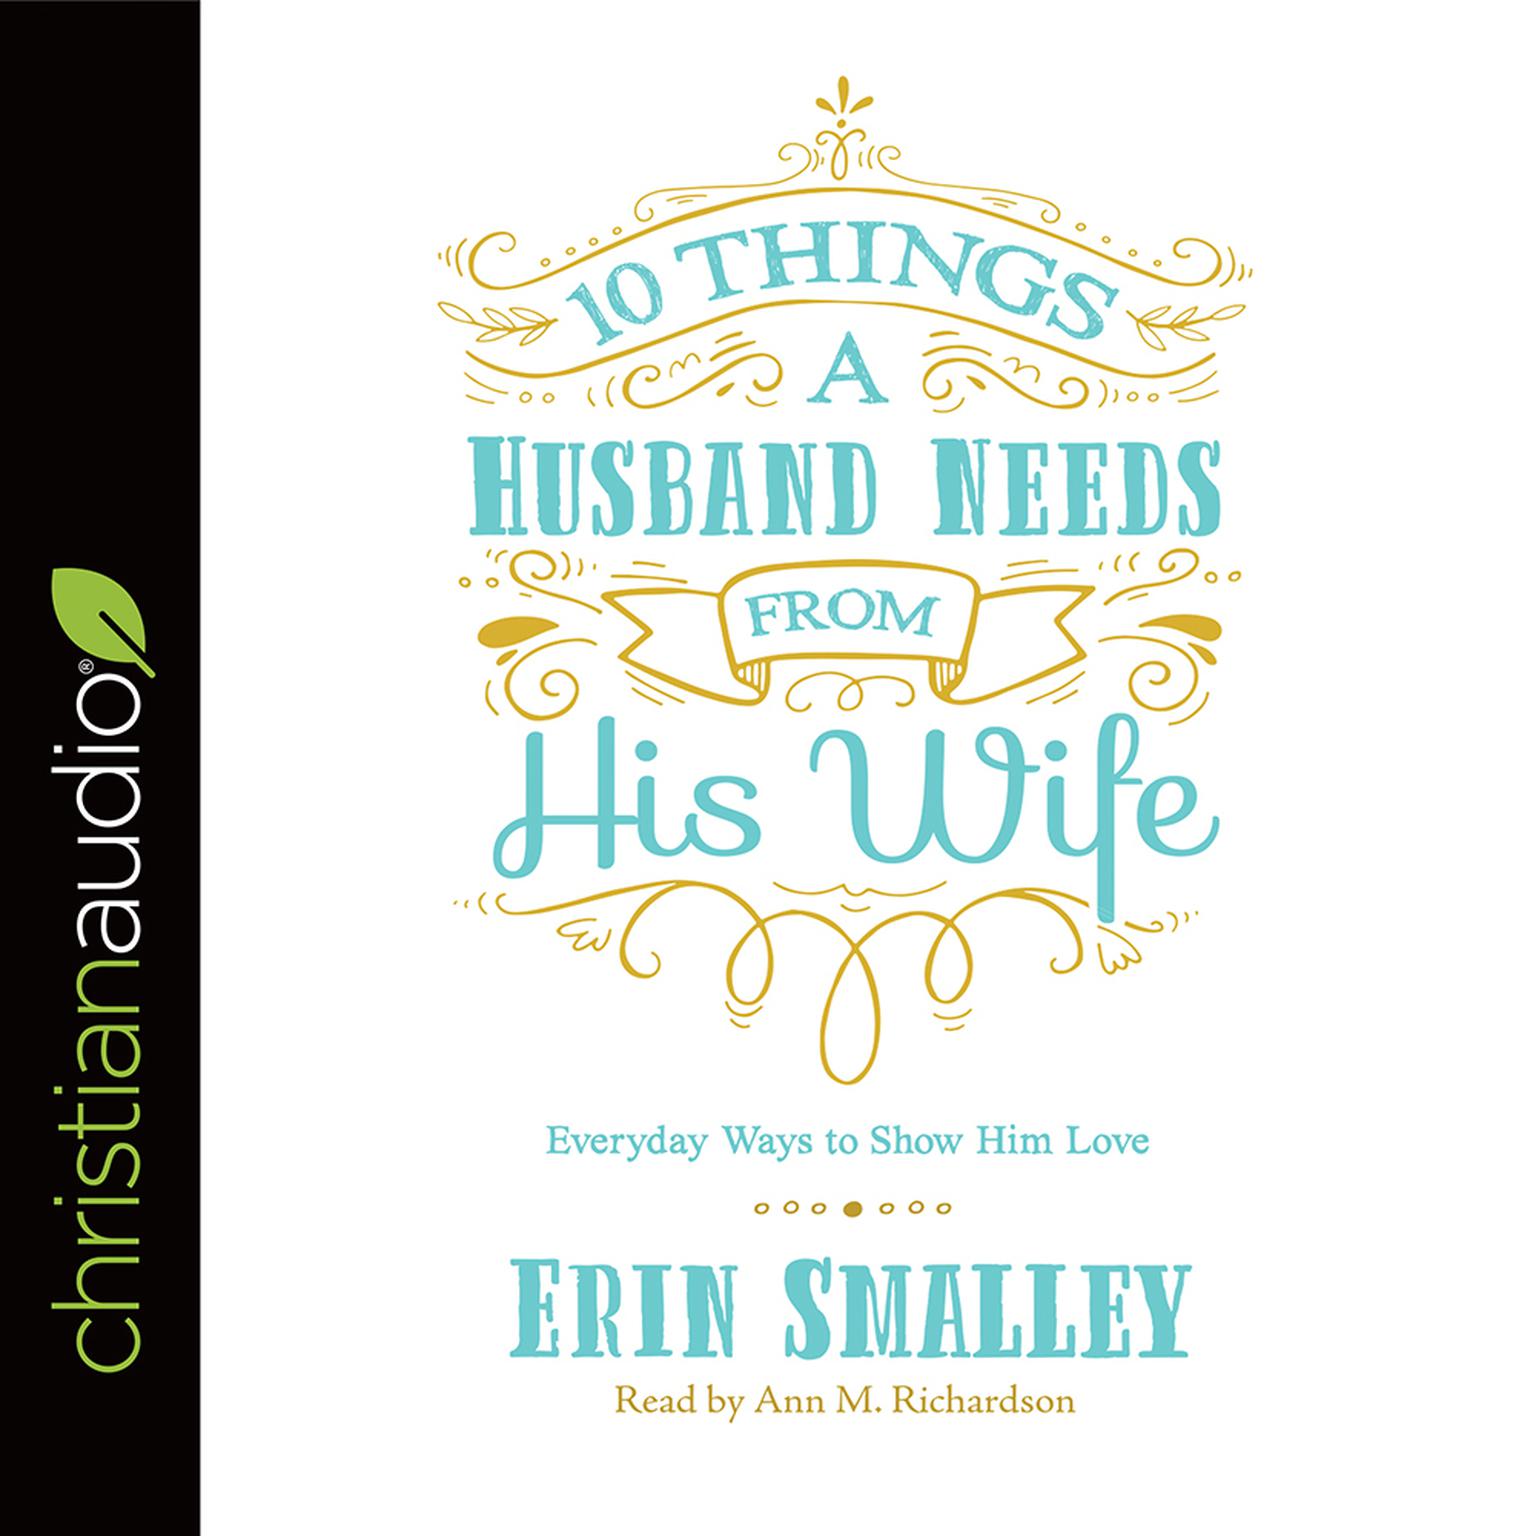 10 Things a Husband Needs from His Wife: Everyday Ways to Show Him Love Audiobook, by Erin Smalley